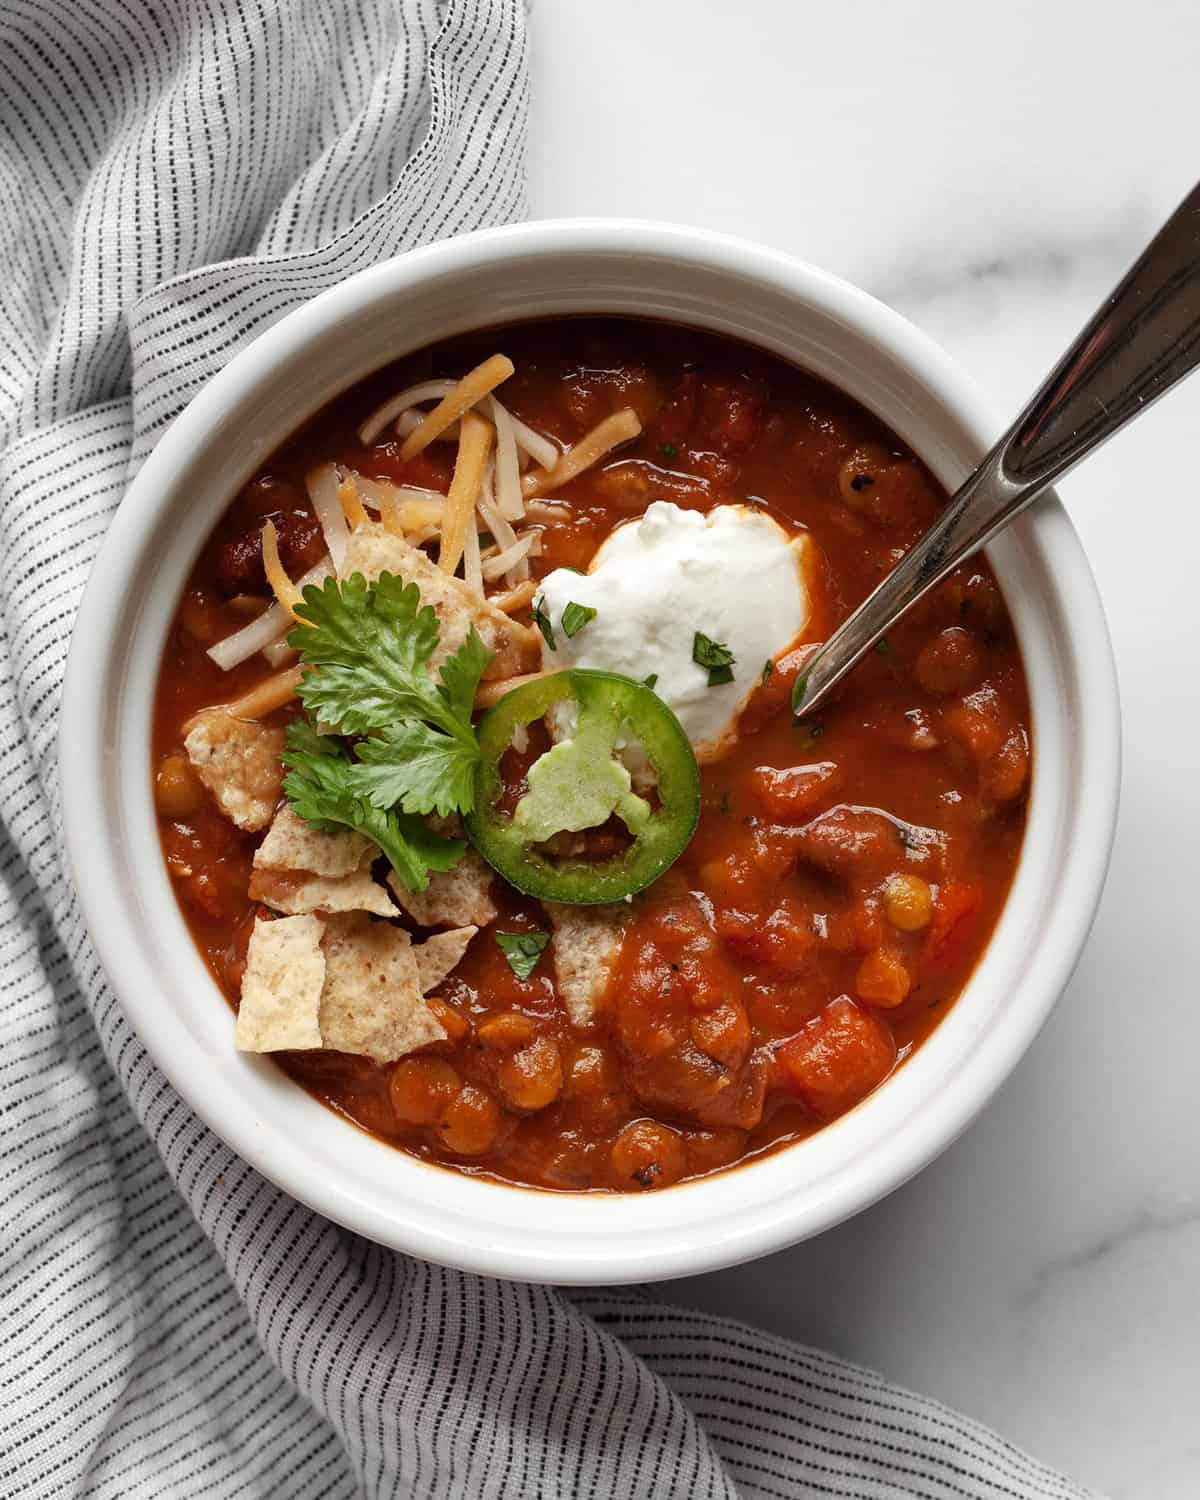 Pumpkin chili with toppings in a bowl.